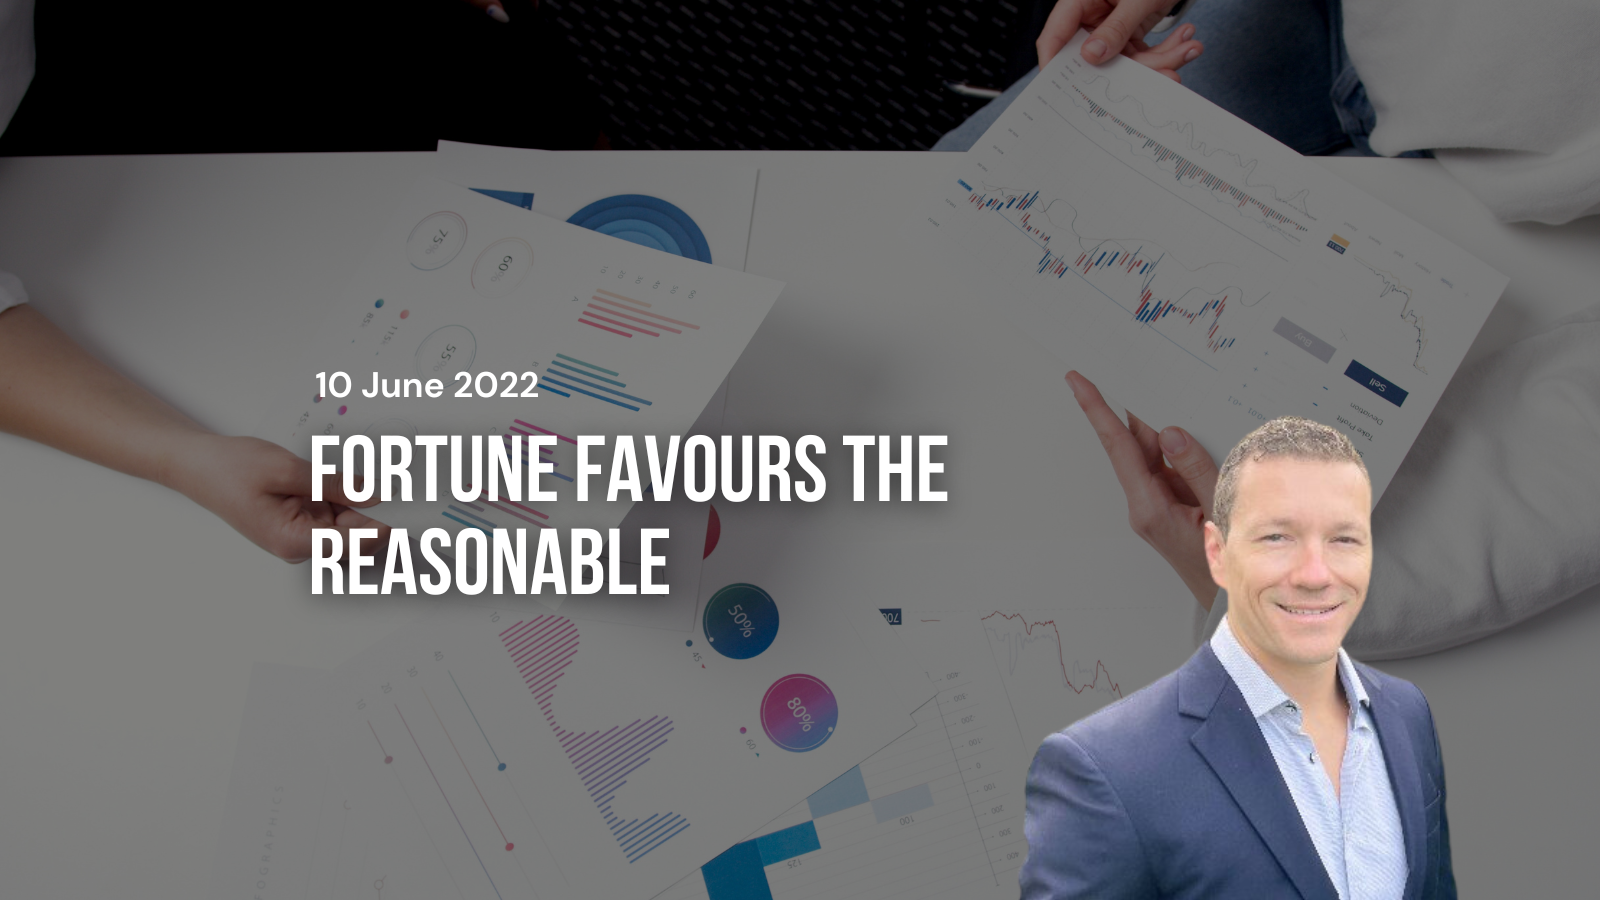 Fortune Favours the Reasonable